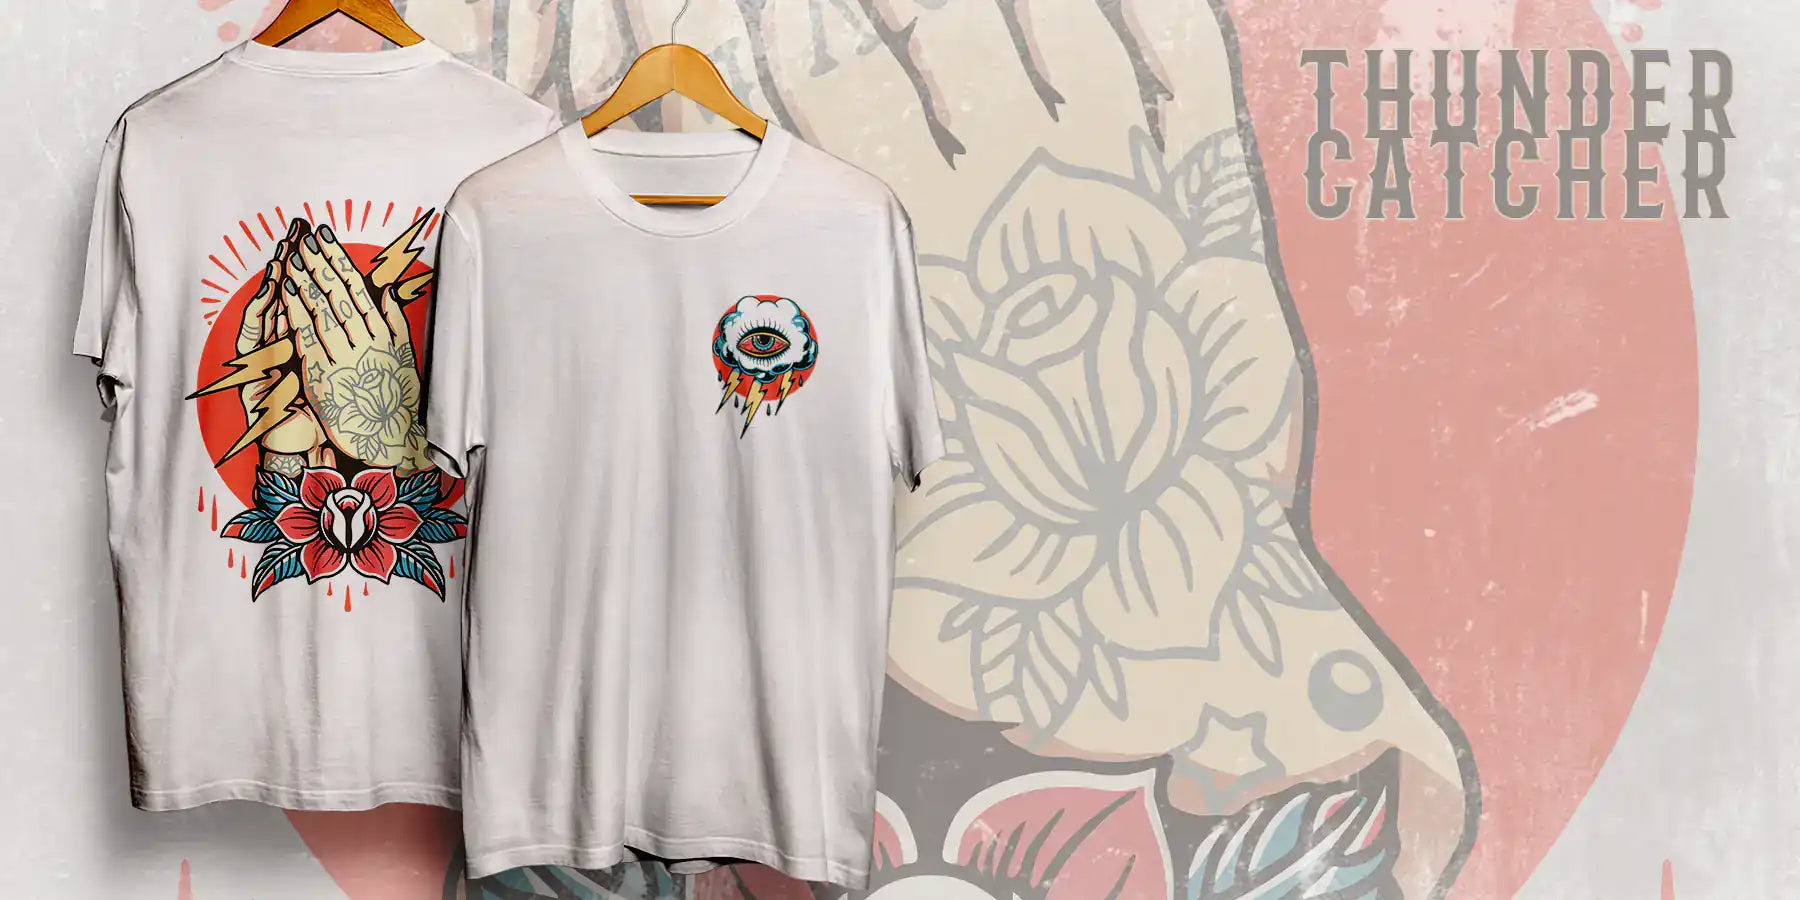 Tattoo style prints, Two vintage white t-shirts hanging, Eye cloud and thunderbolt, Back showing hands praying, Flower, lightning bolts and flash